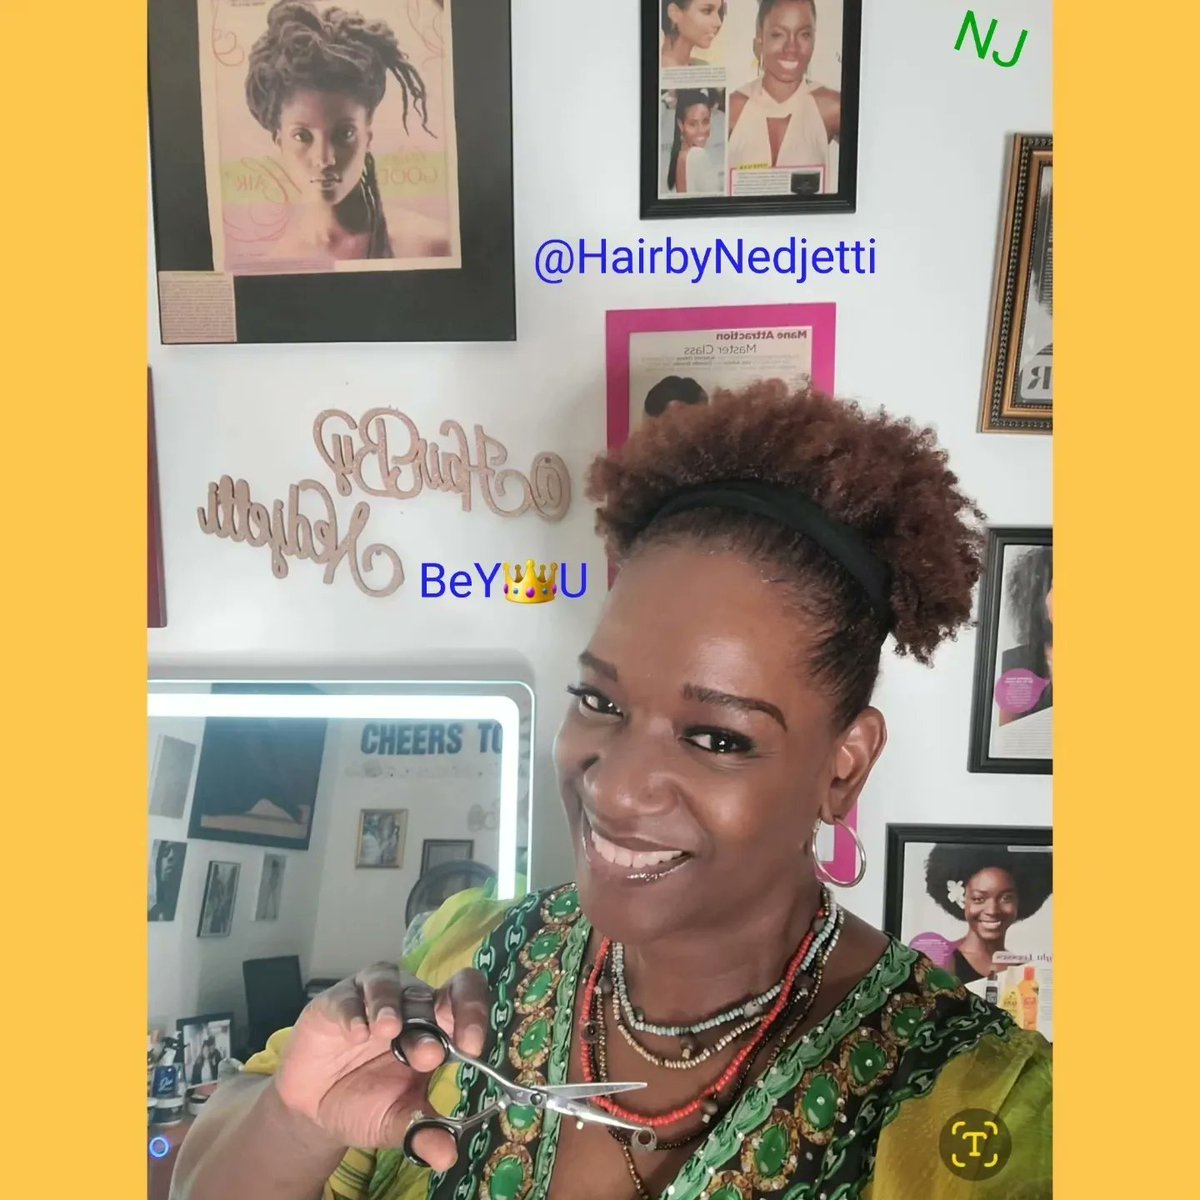 #HairMeOut®🤸🏾‍♀️ Spring is #HAIR NEW #Naturalistas 

👩🏾‍💻 Book Online today 👉🏾StyleSeat.com/NedjettiHarvey 

⭐️June 1st - 30th receive a FREE #SteamTreatment ($50 value) and hydrate your Coily/Curly #NaturalHair & #Locs at your 'private' #HairapyOasis HairbyNedjetti.com…